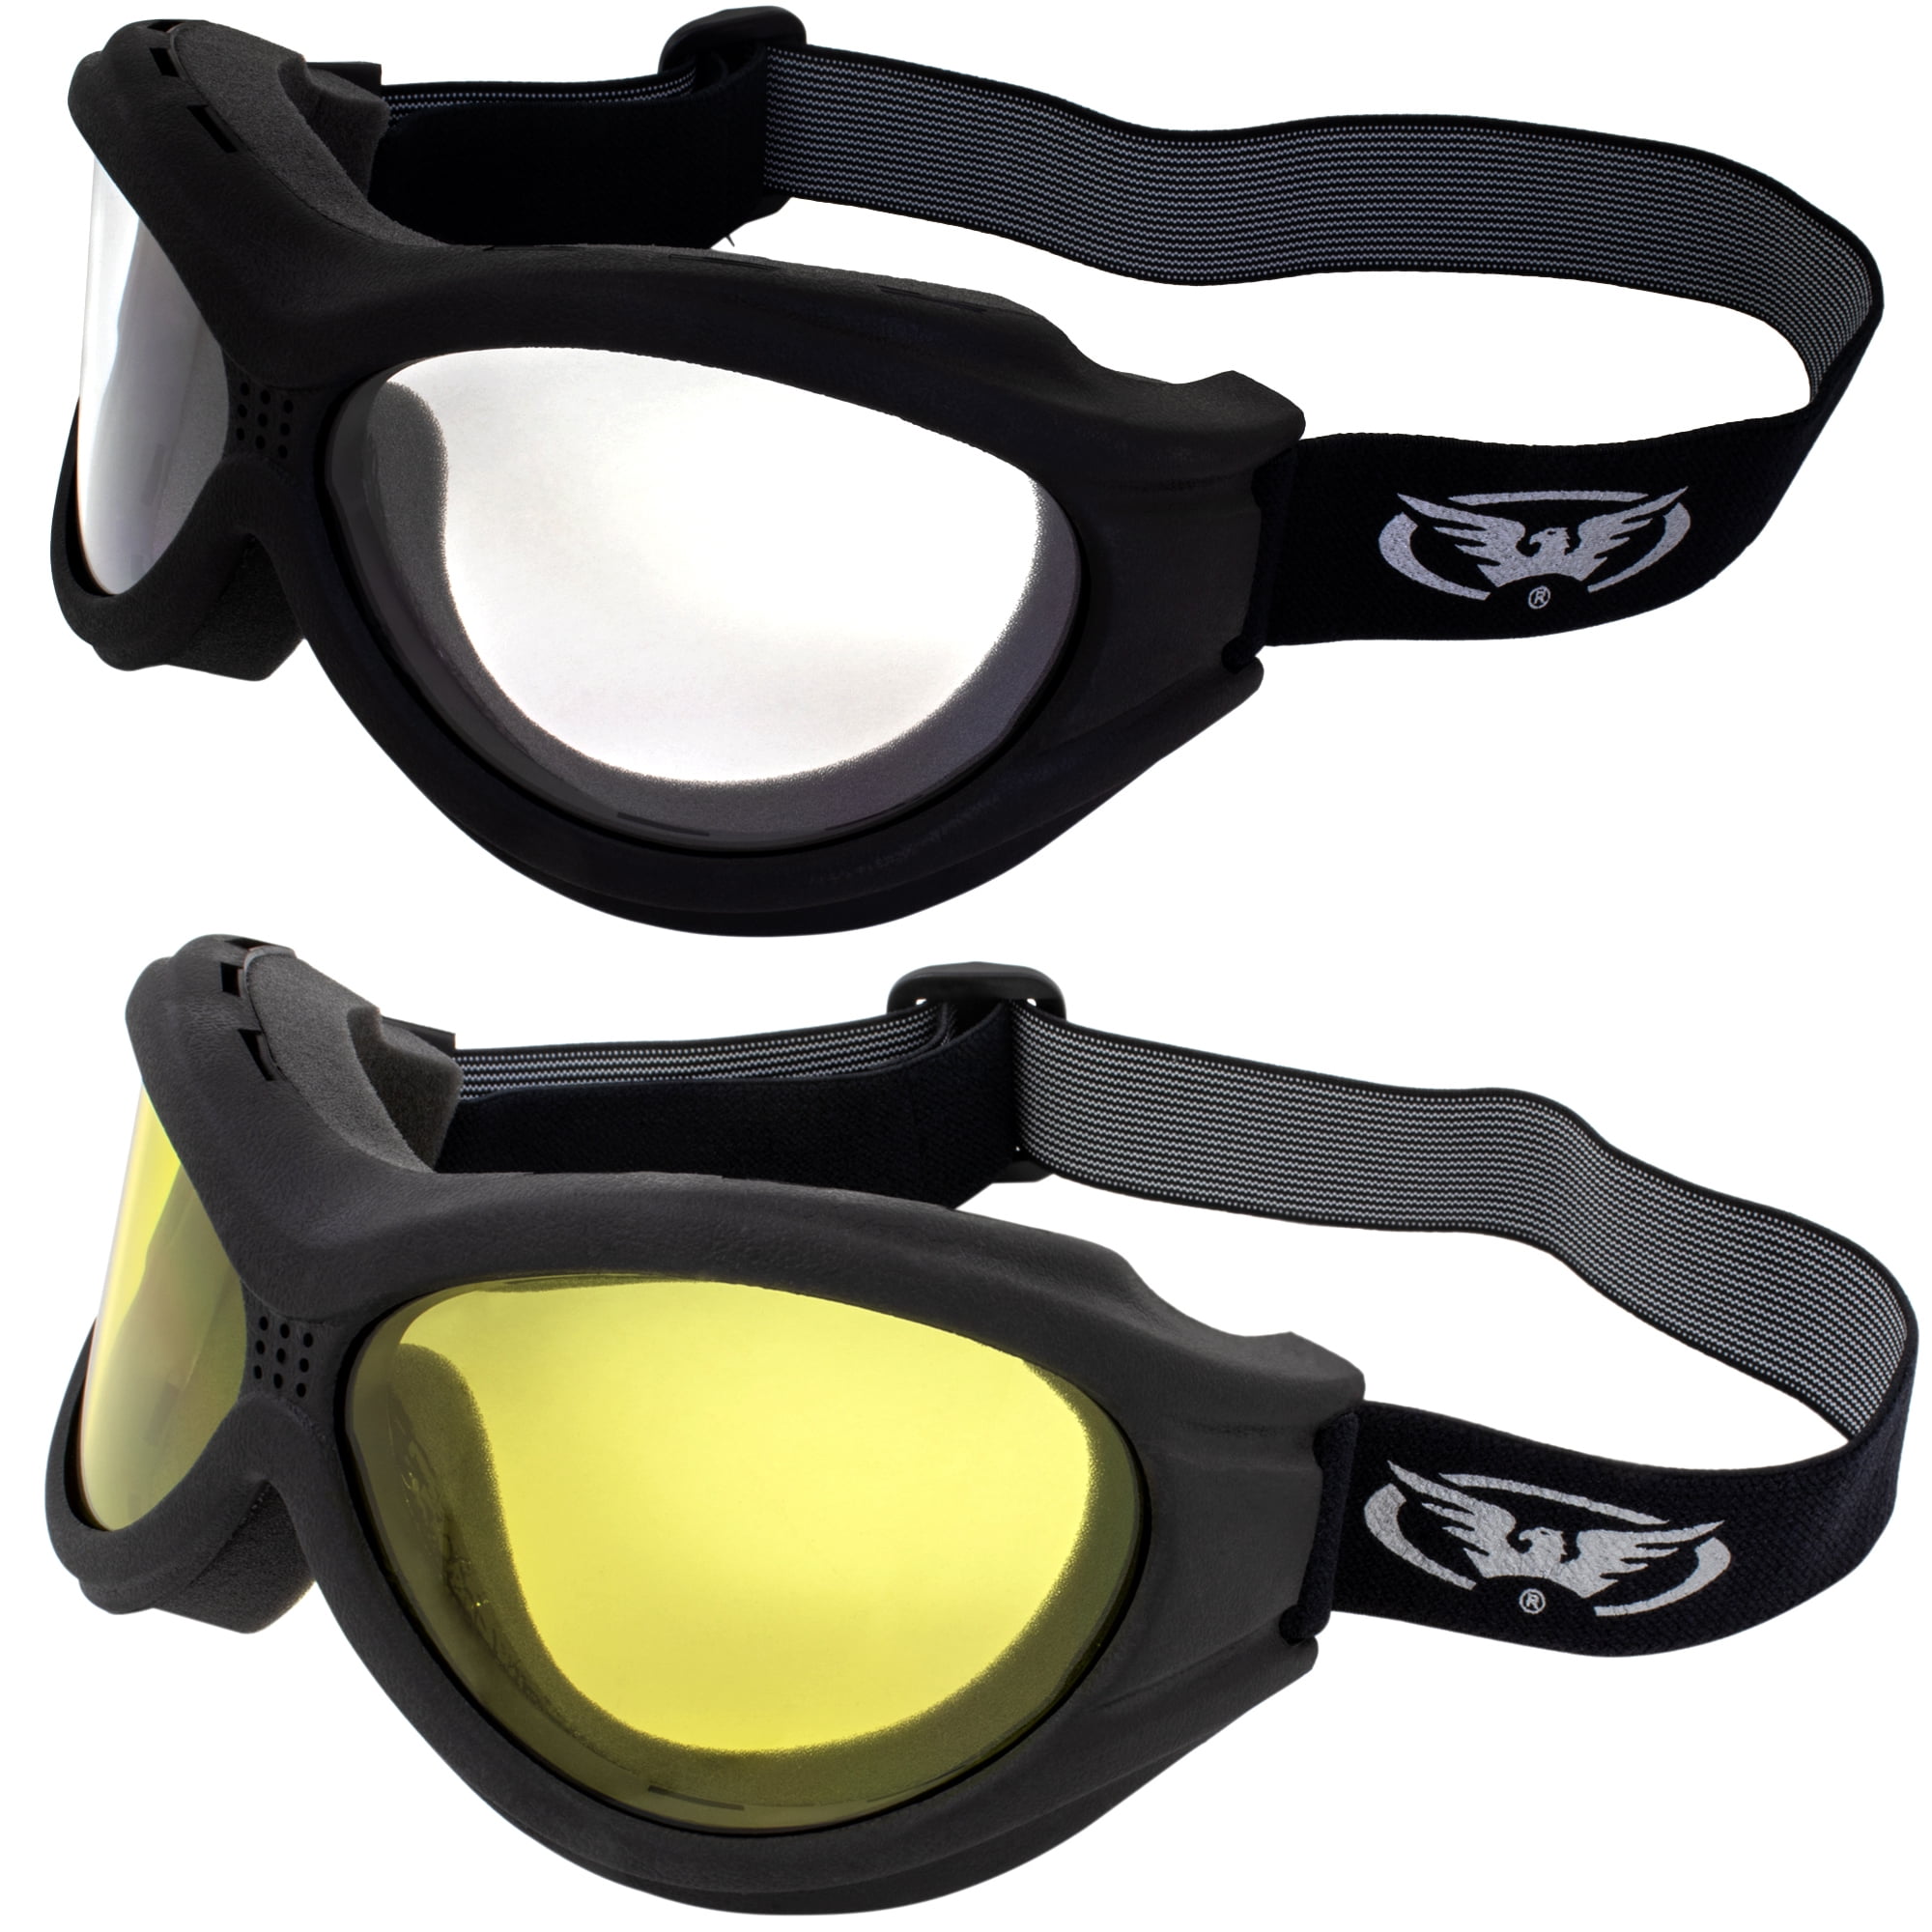 Big Ben Fitover Black Frame Motorcycle Goggles with Shatterproof Yellow Lenses 